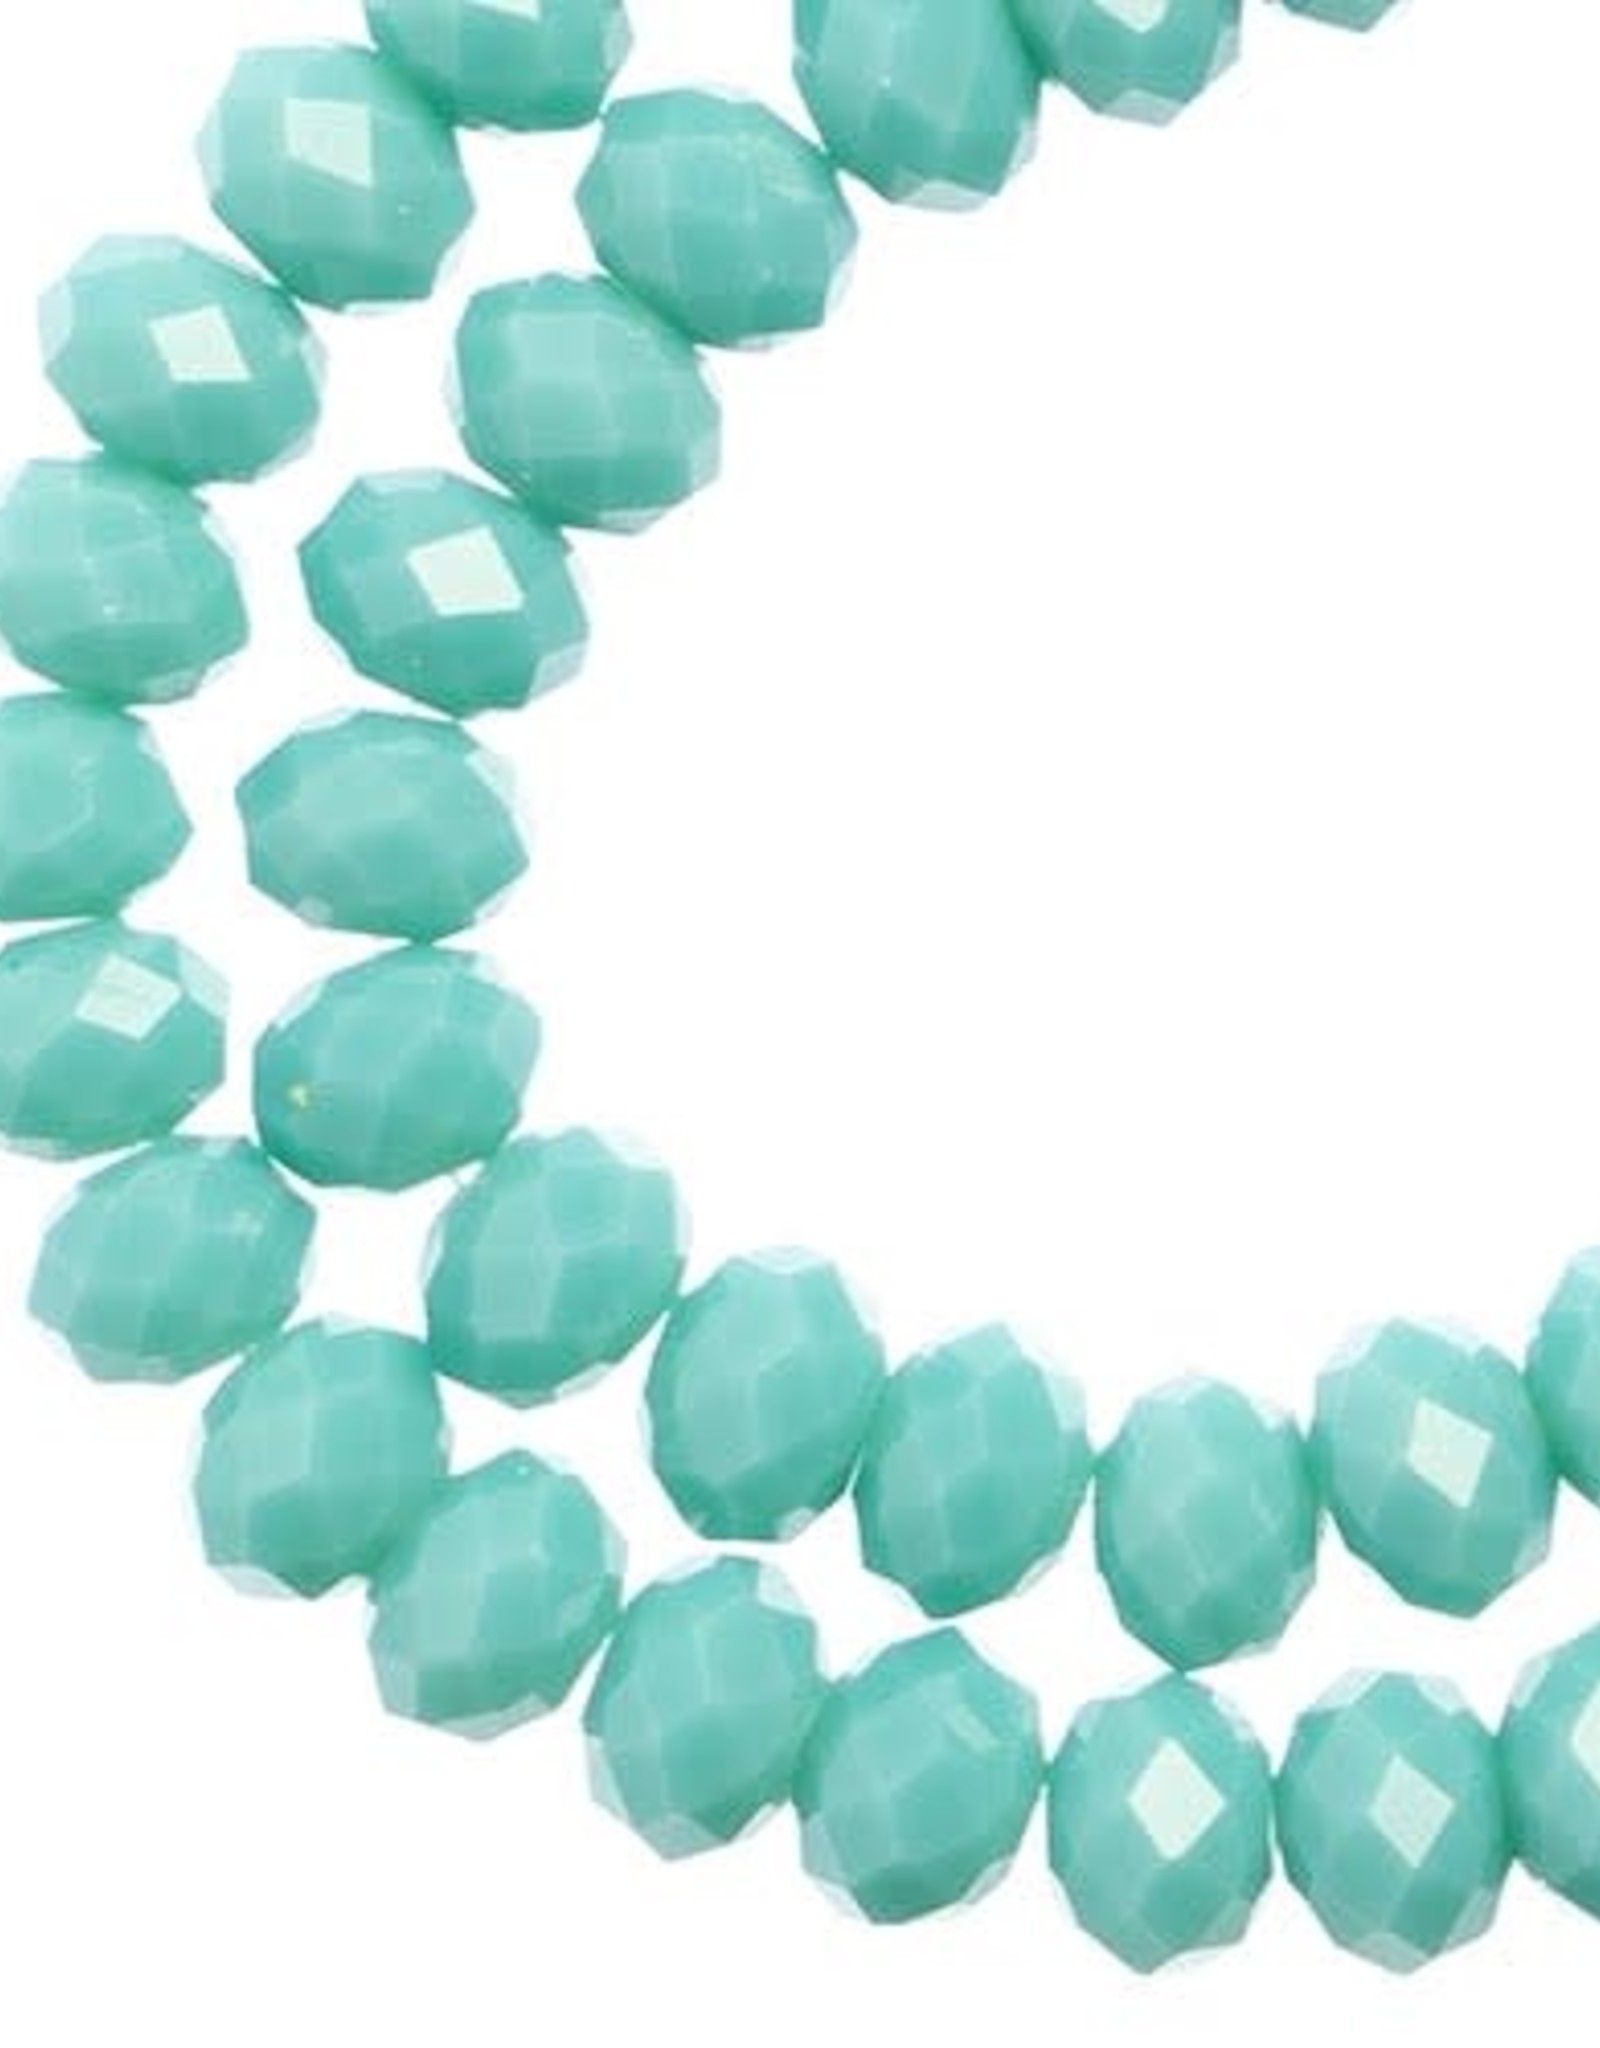 Crystal Lane Rondelle Crystal Lane Rondelle 2Strand 7in (apx78pcs) 4x6mm Opaque Turquoise Blue